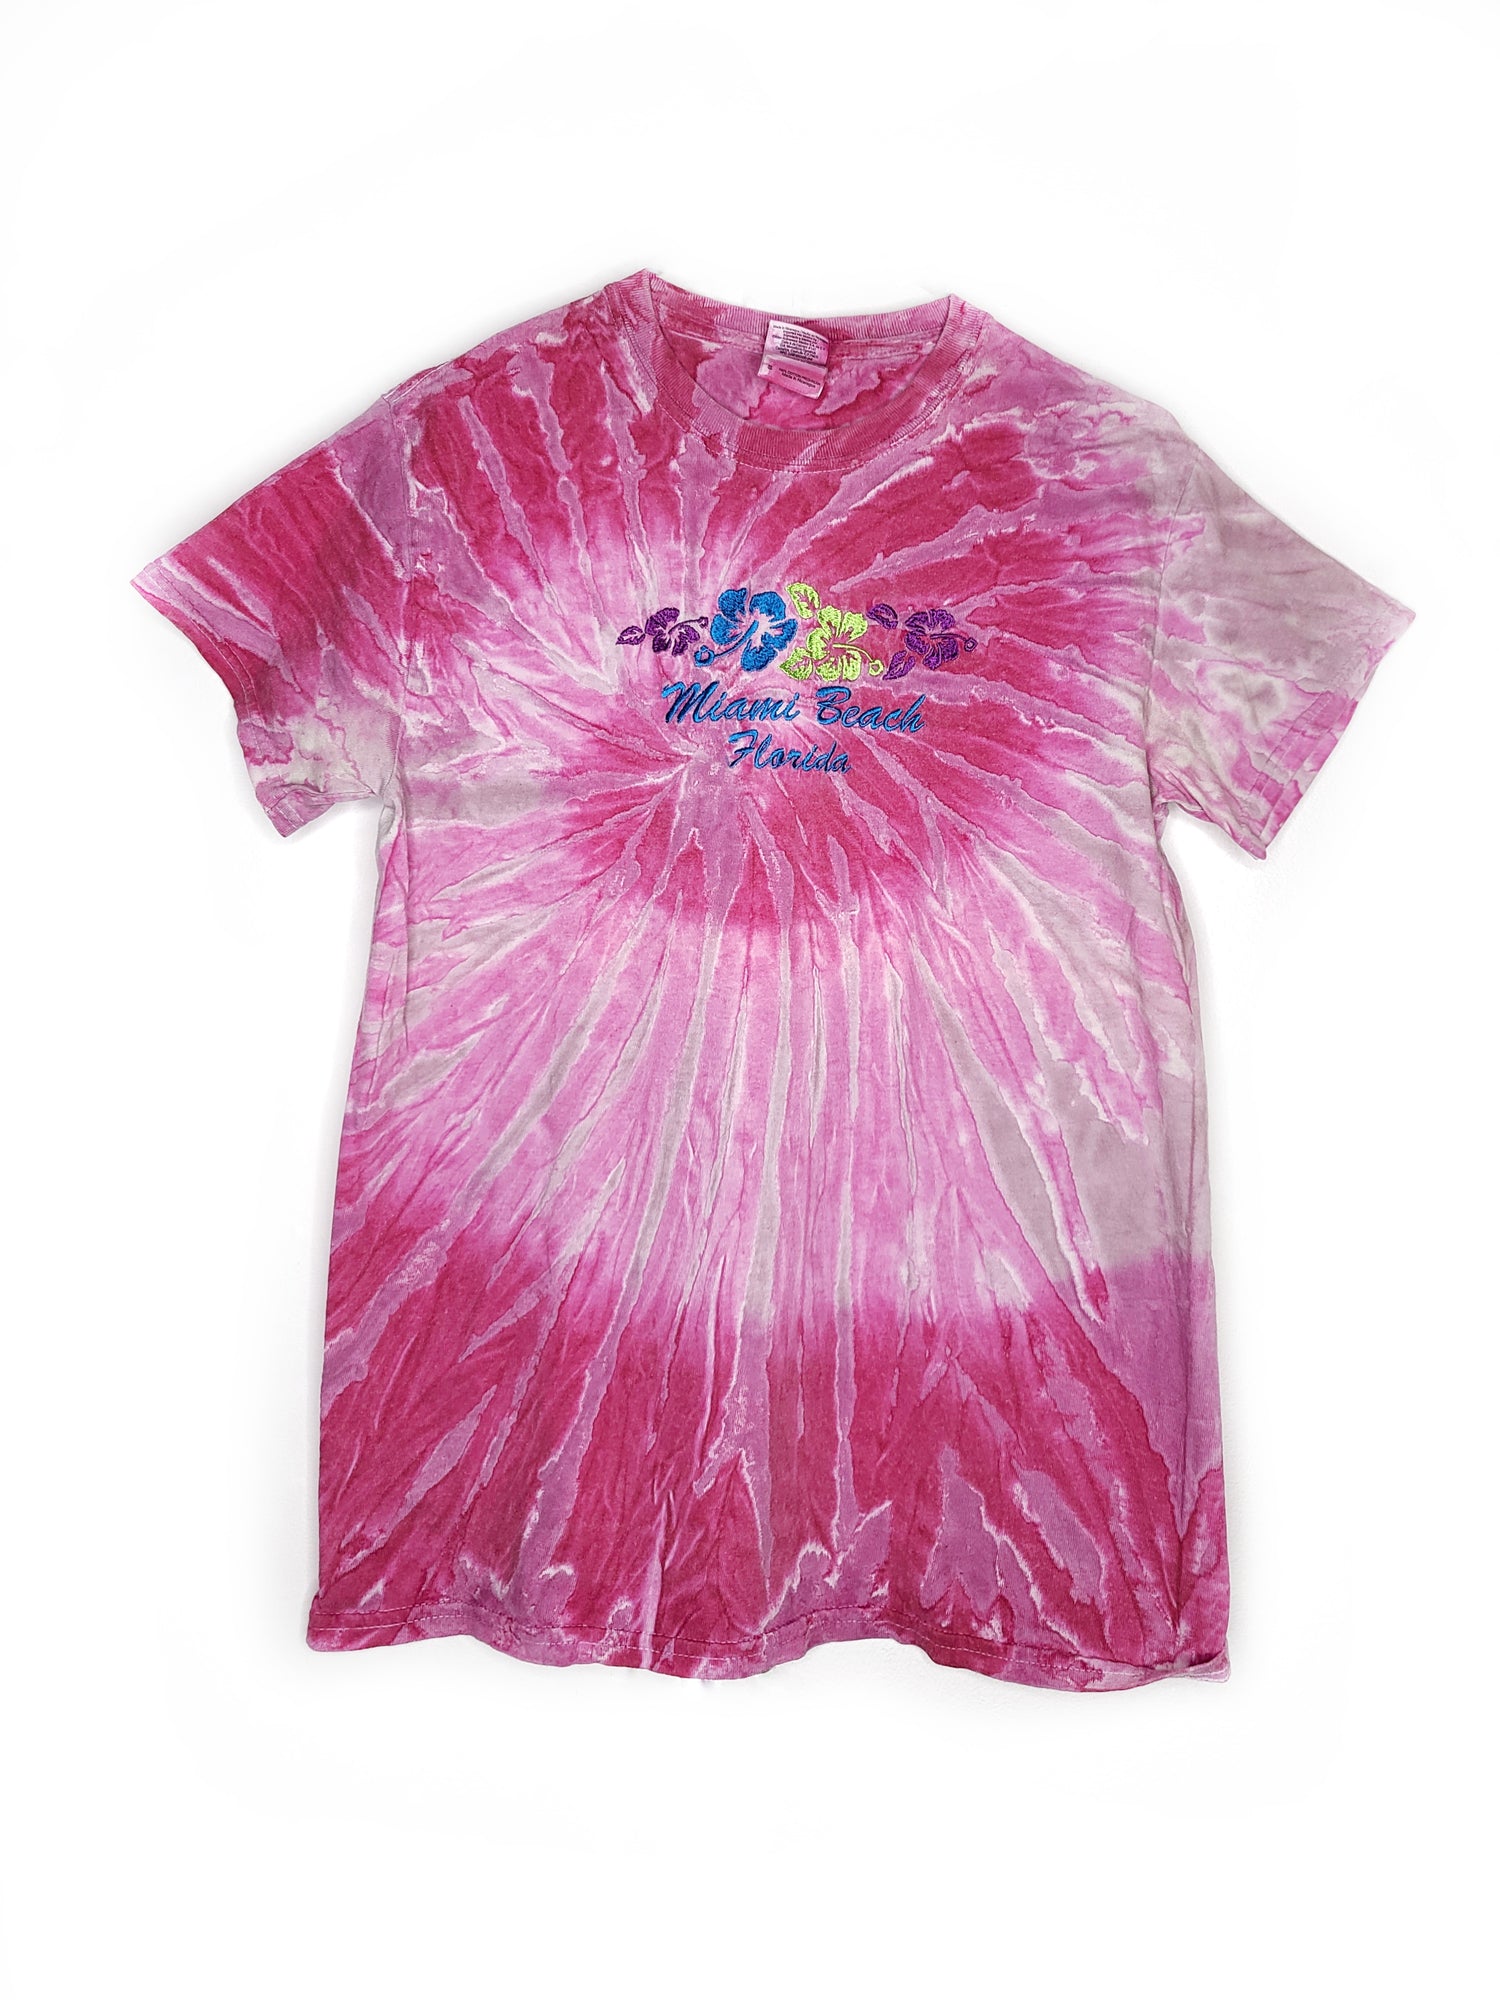 Tshirt tie and dye rose 80s streetwear funky miami beach flocage vintage oversize floride hibiscus psyche